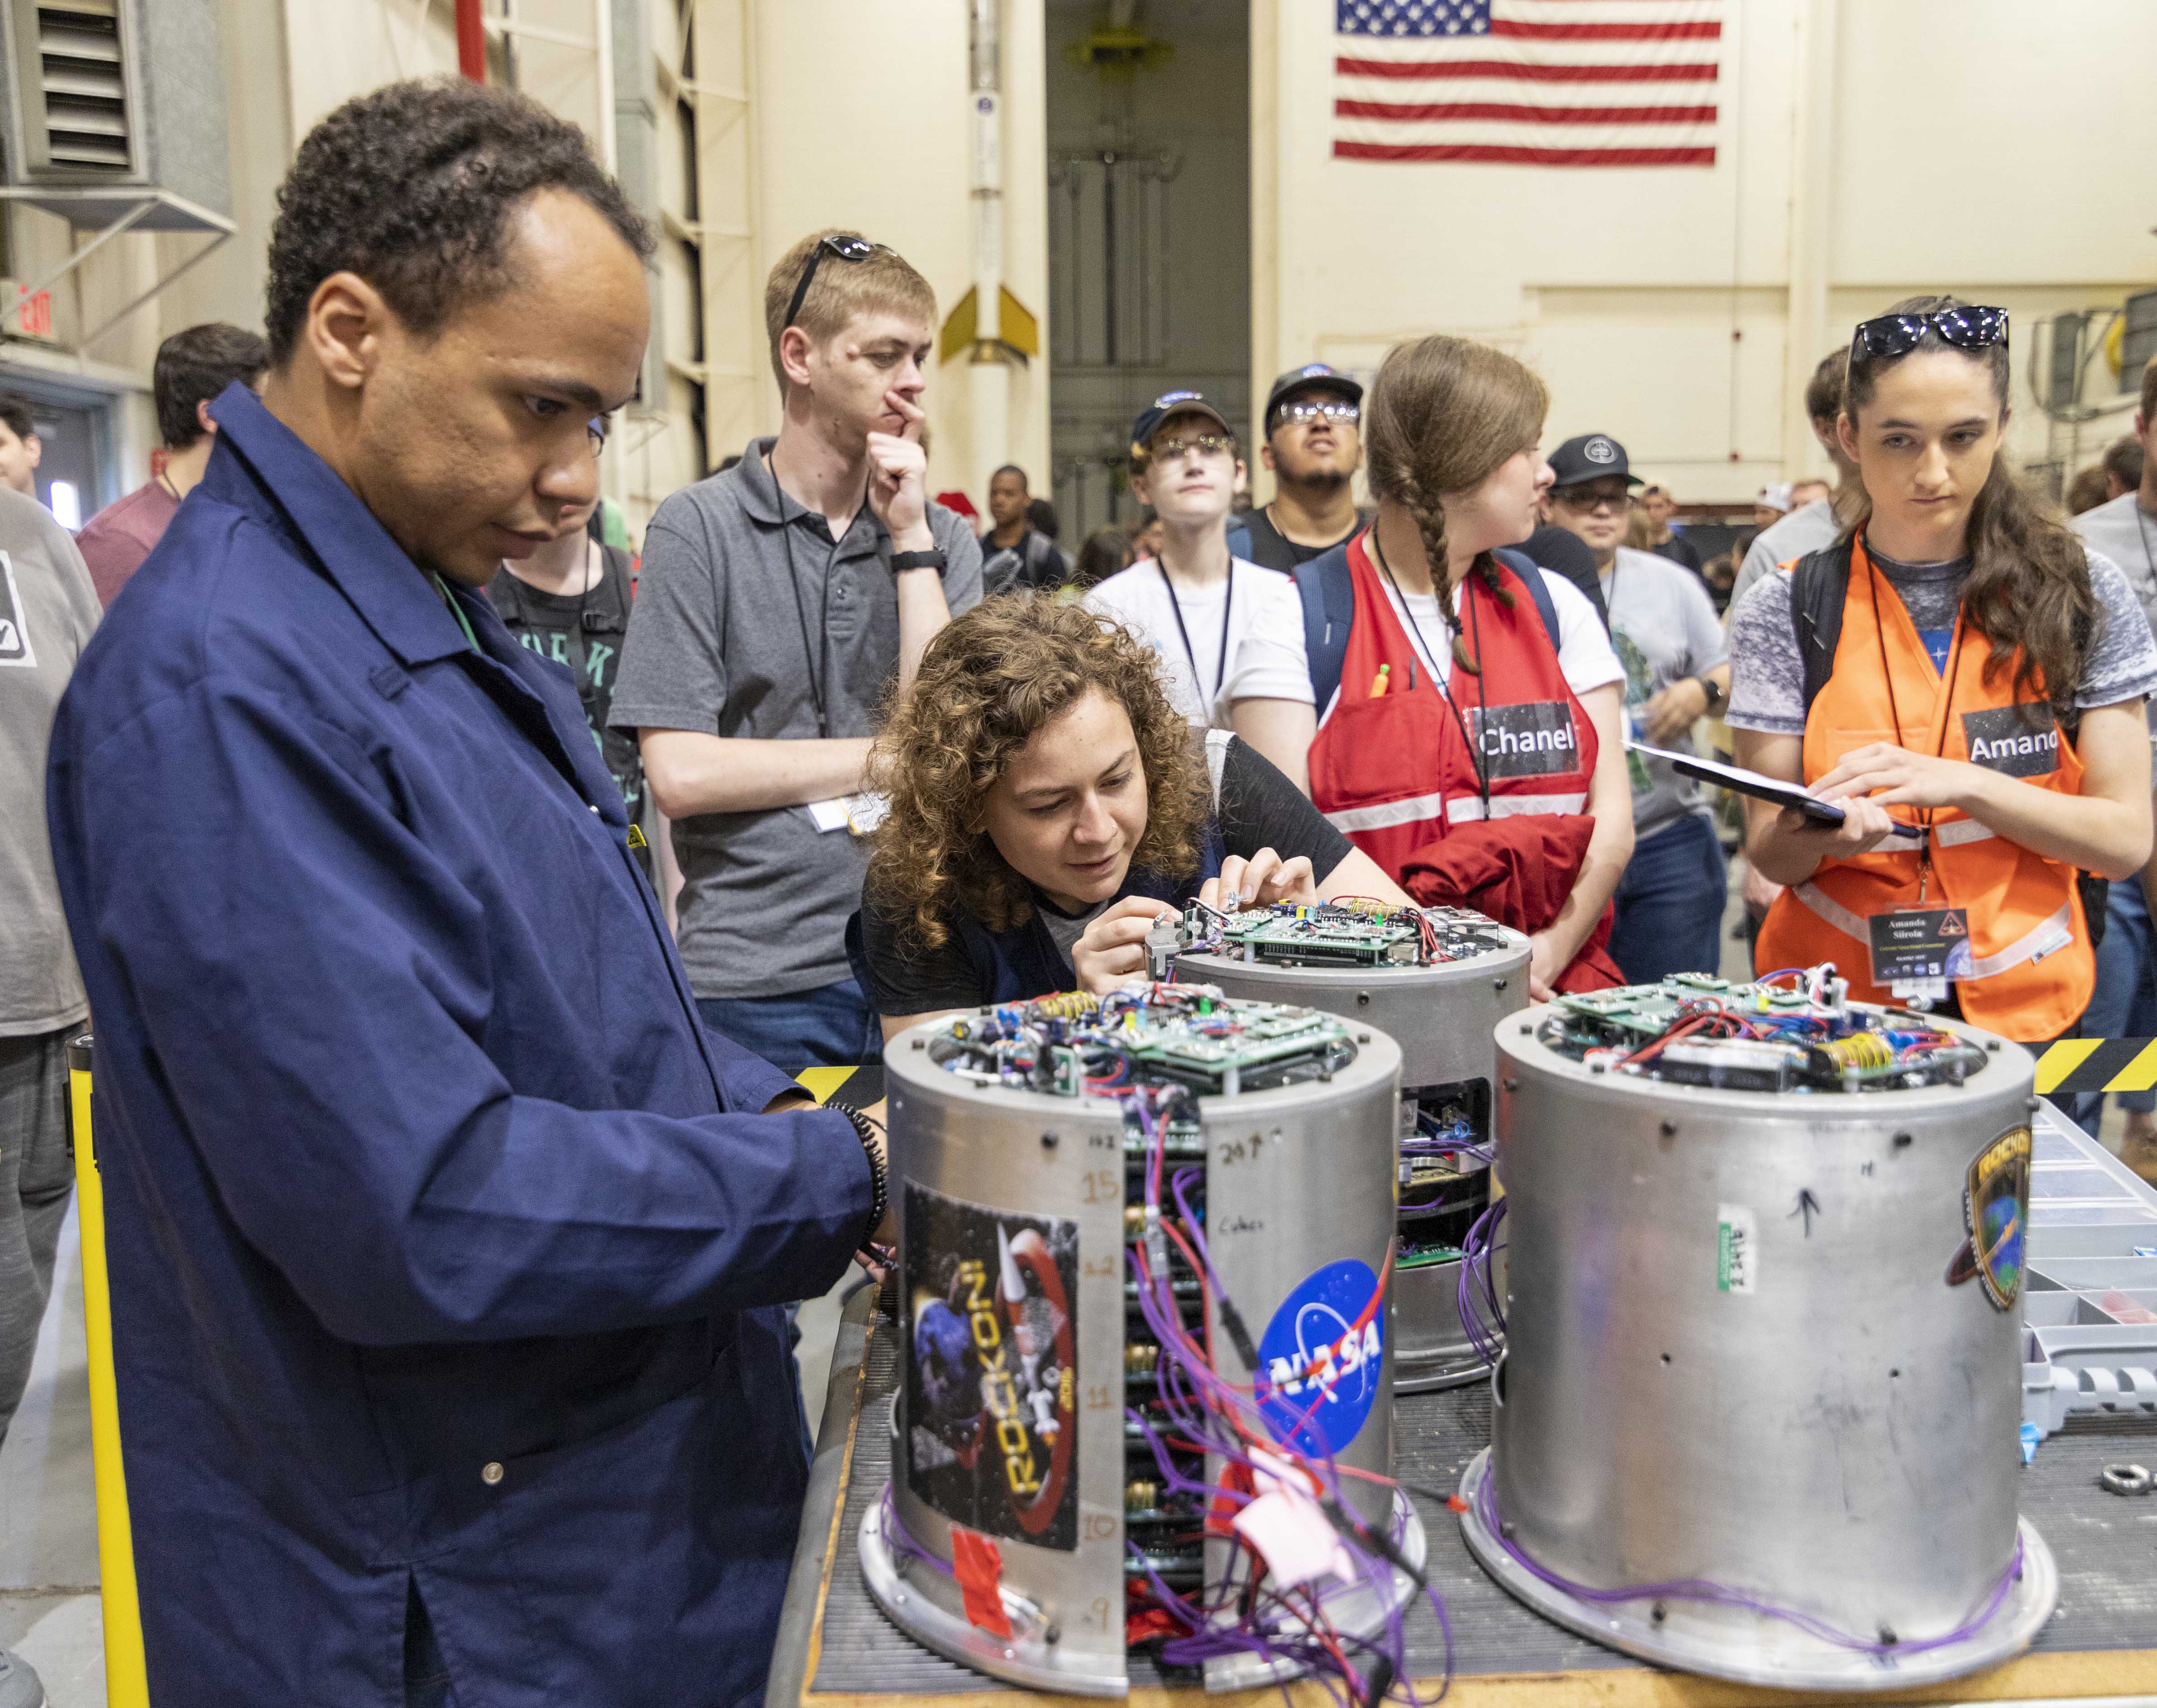 Students and NASA staff examining payloads before installing them in the rocket